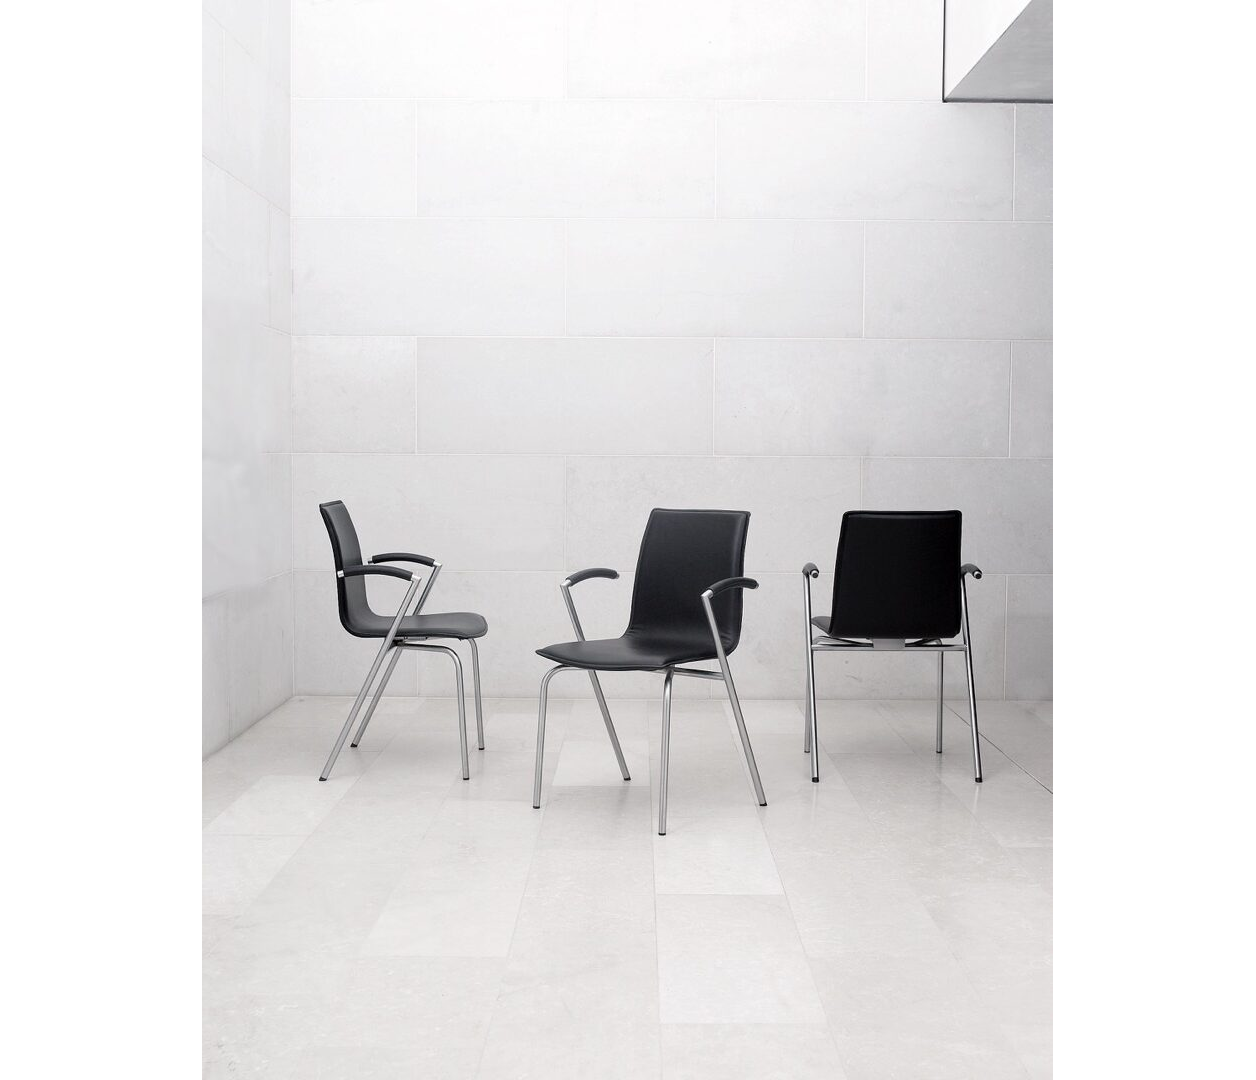 OCEE_FOUR – Chairs – G2 – Lifestyle Image 2 Large